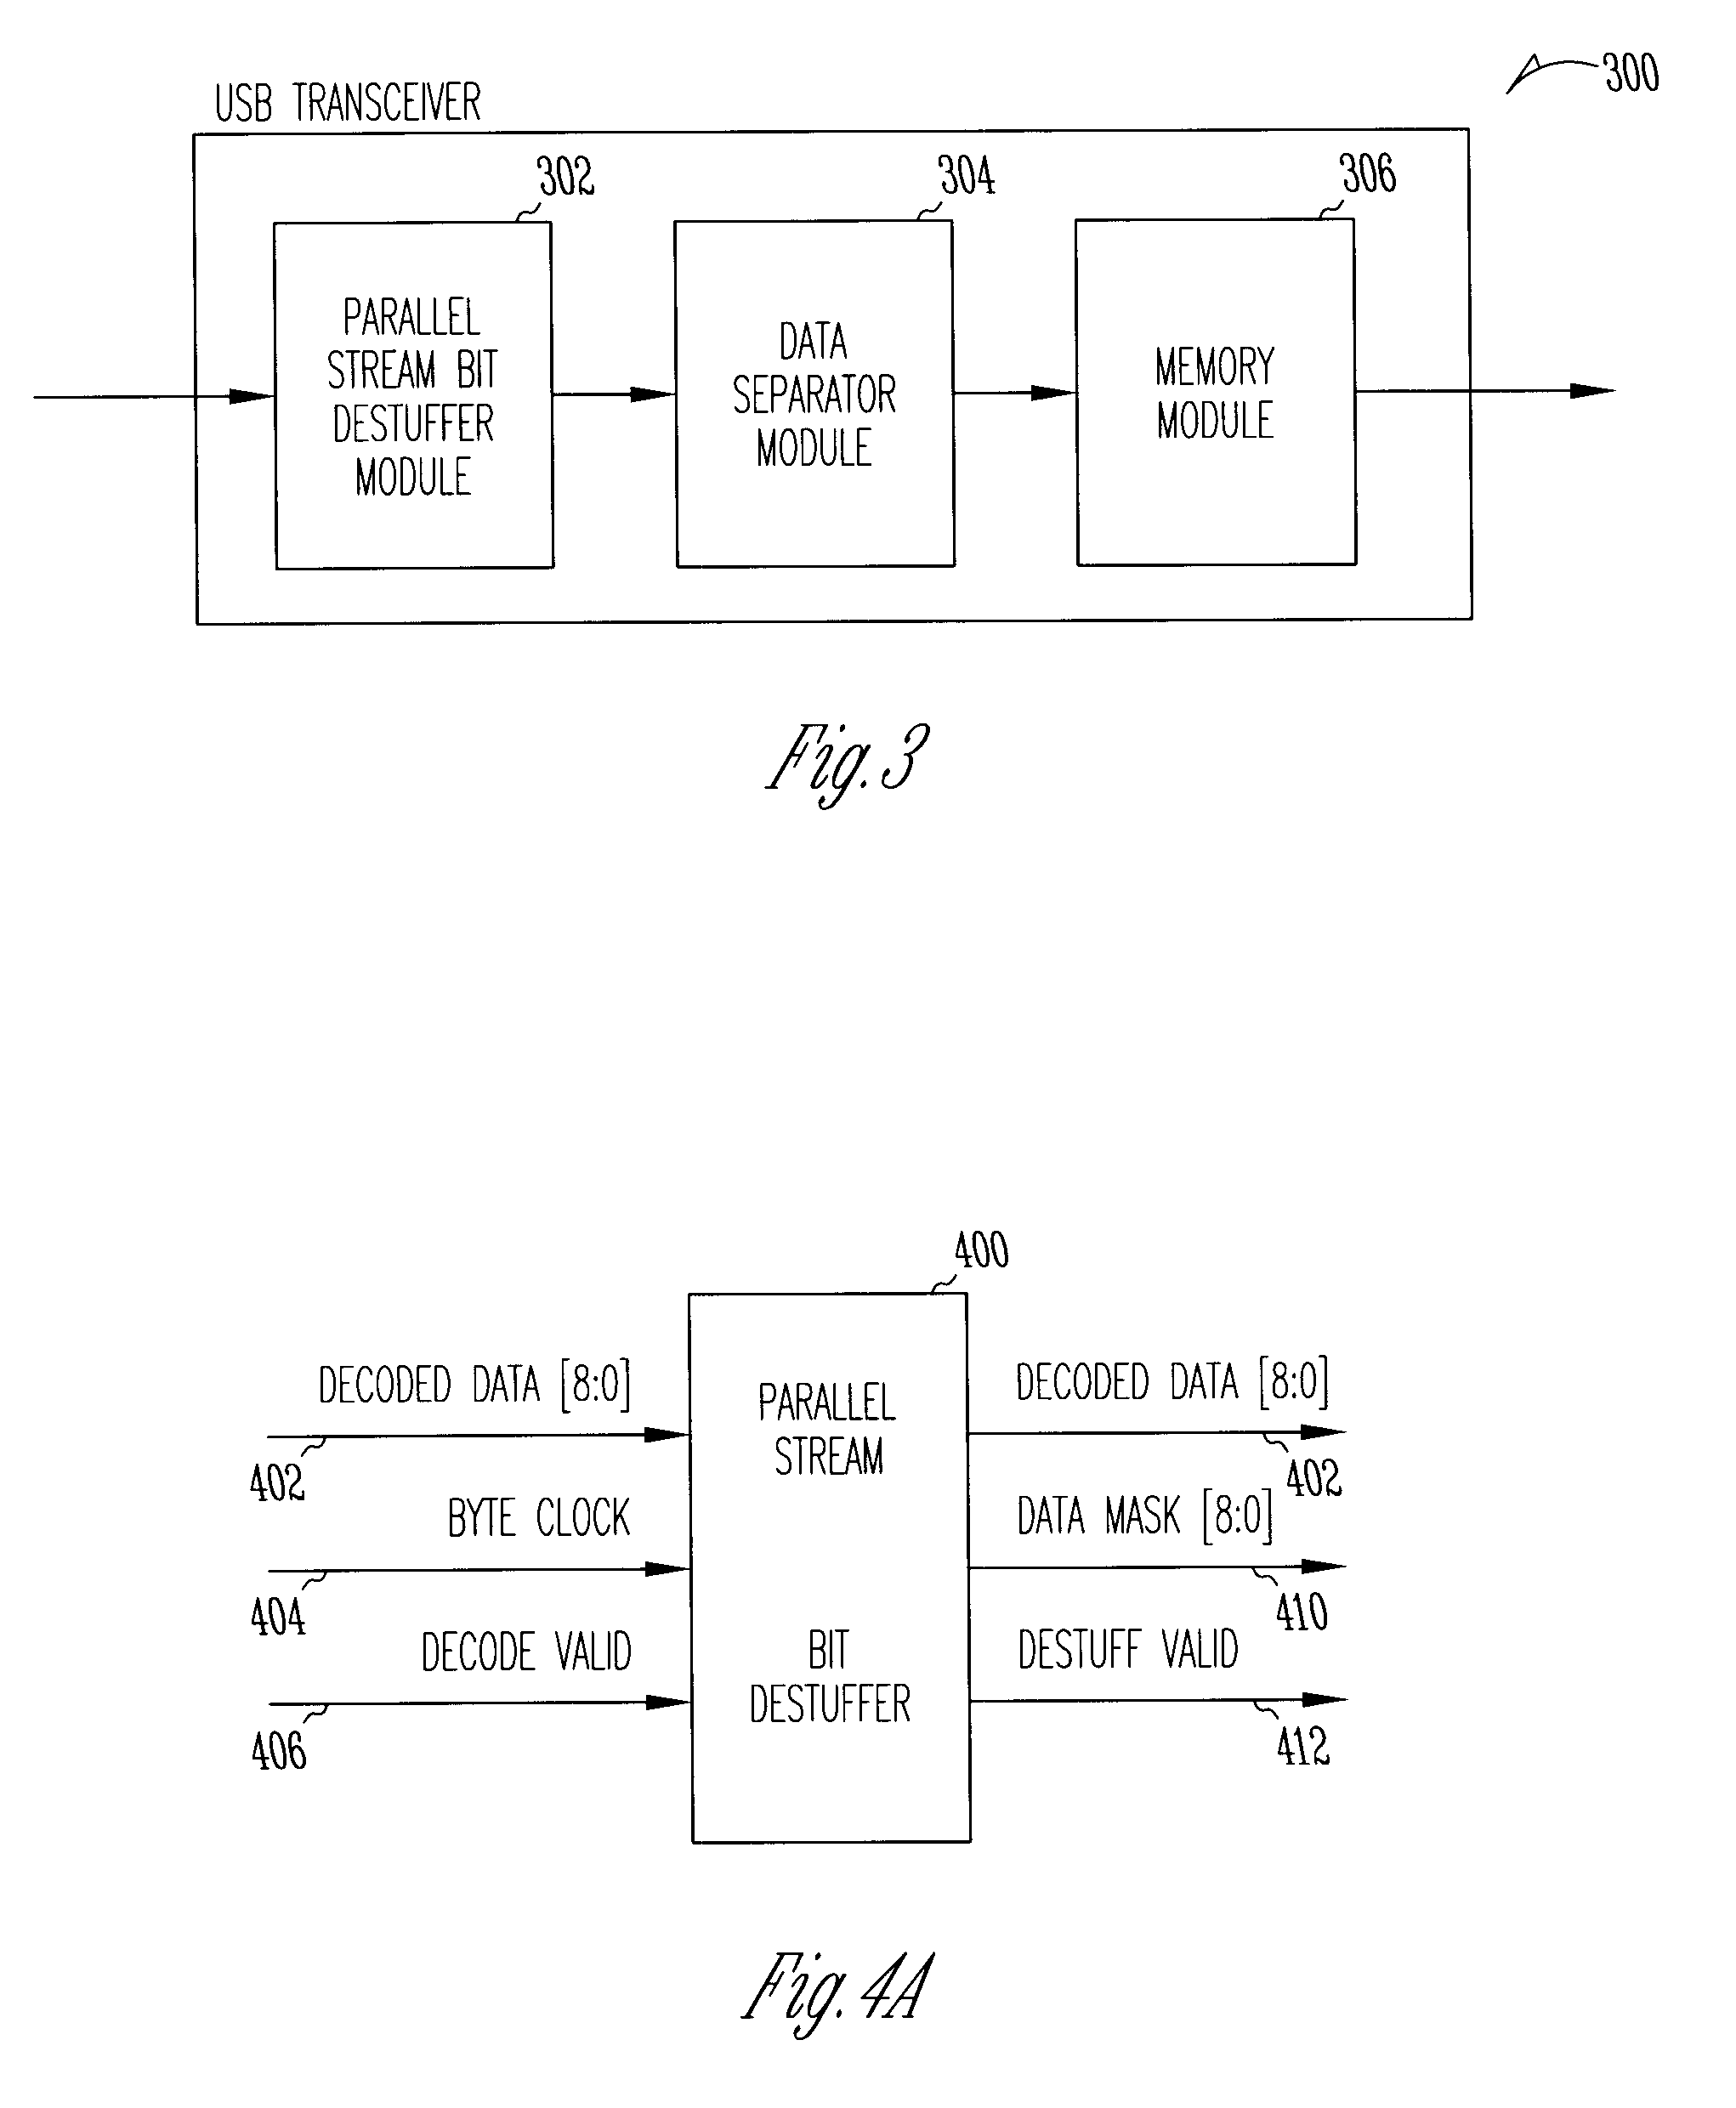 Concurrent asynchronous USB data stream destuffer with variable width bit-wise memory controller